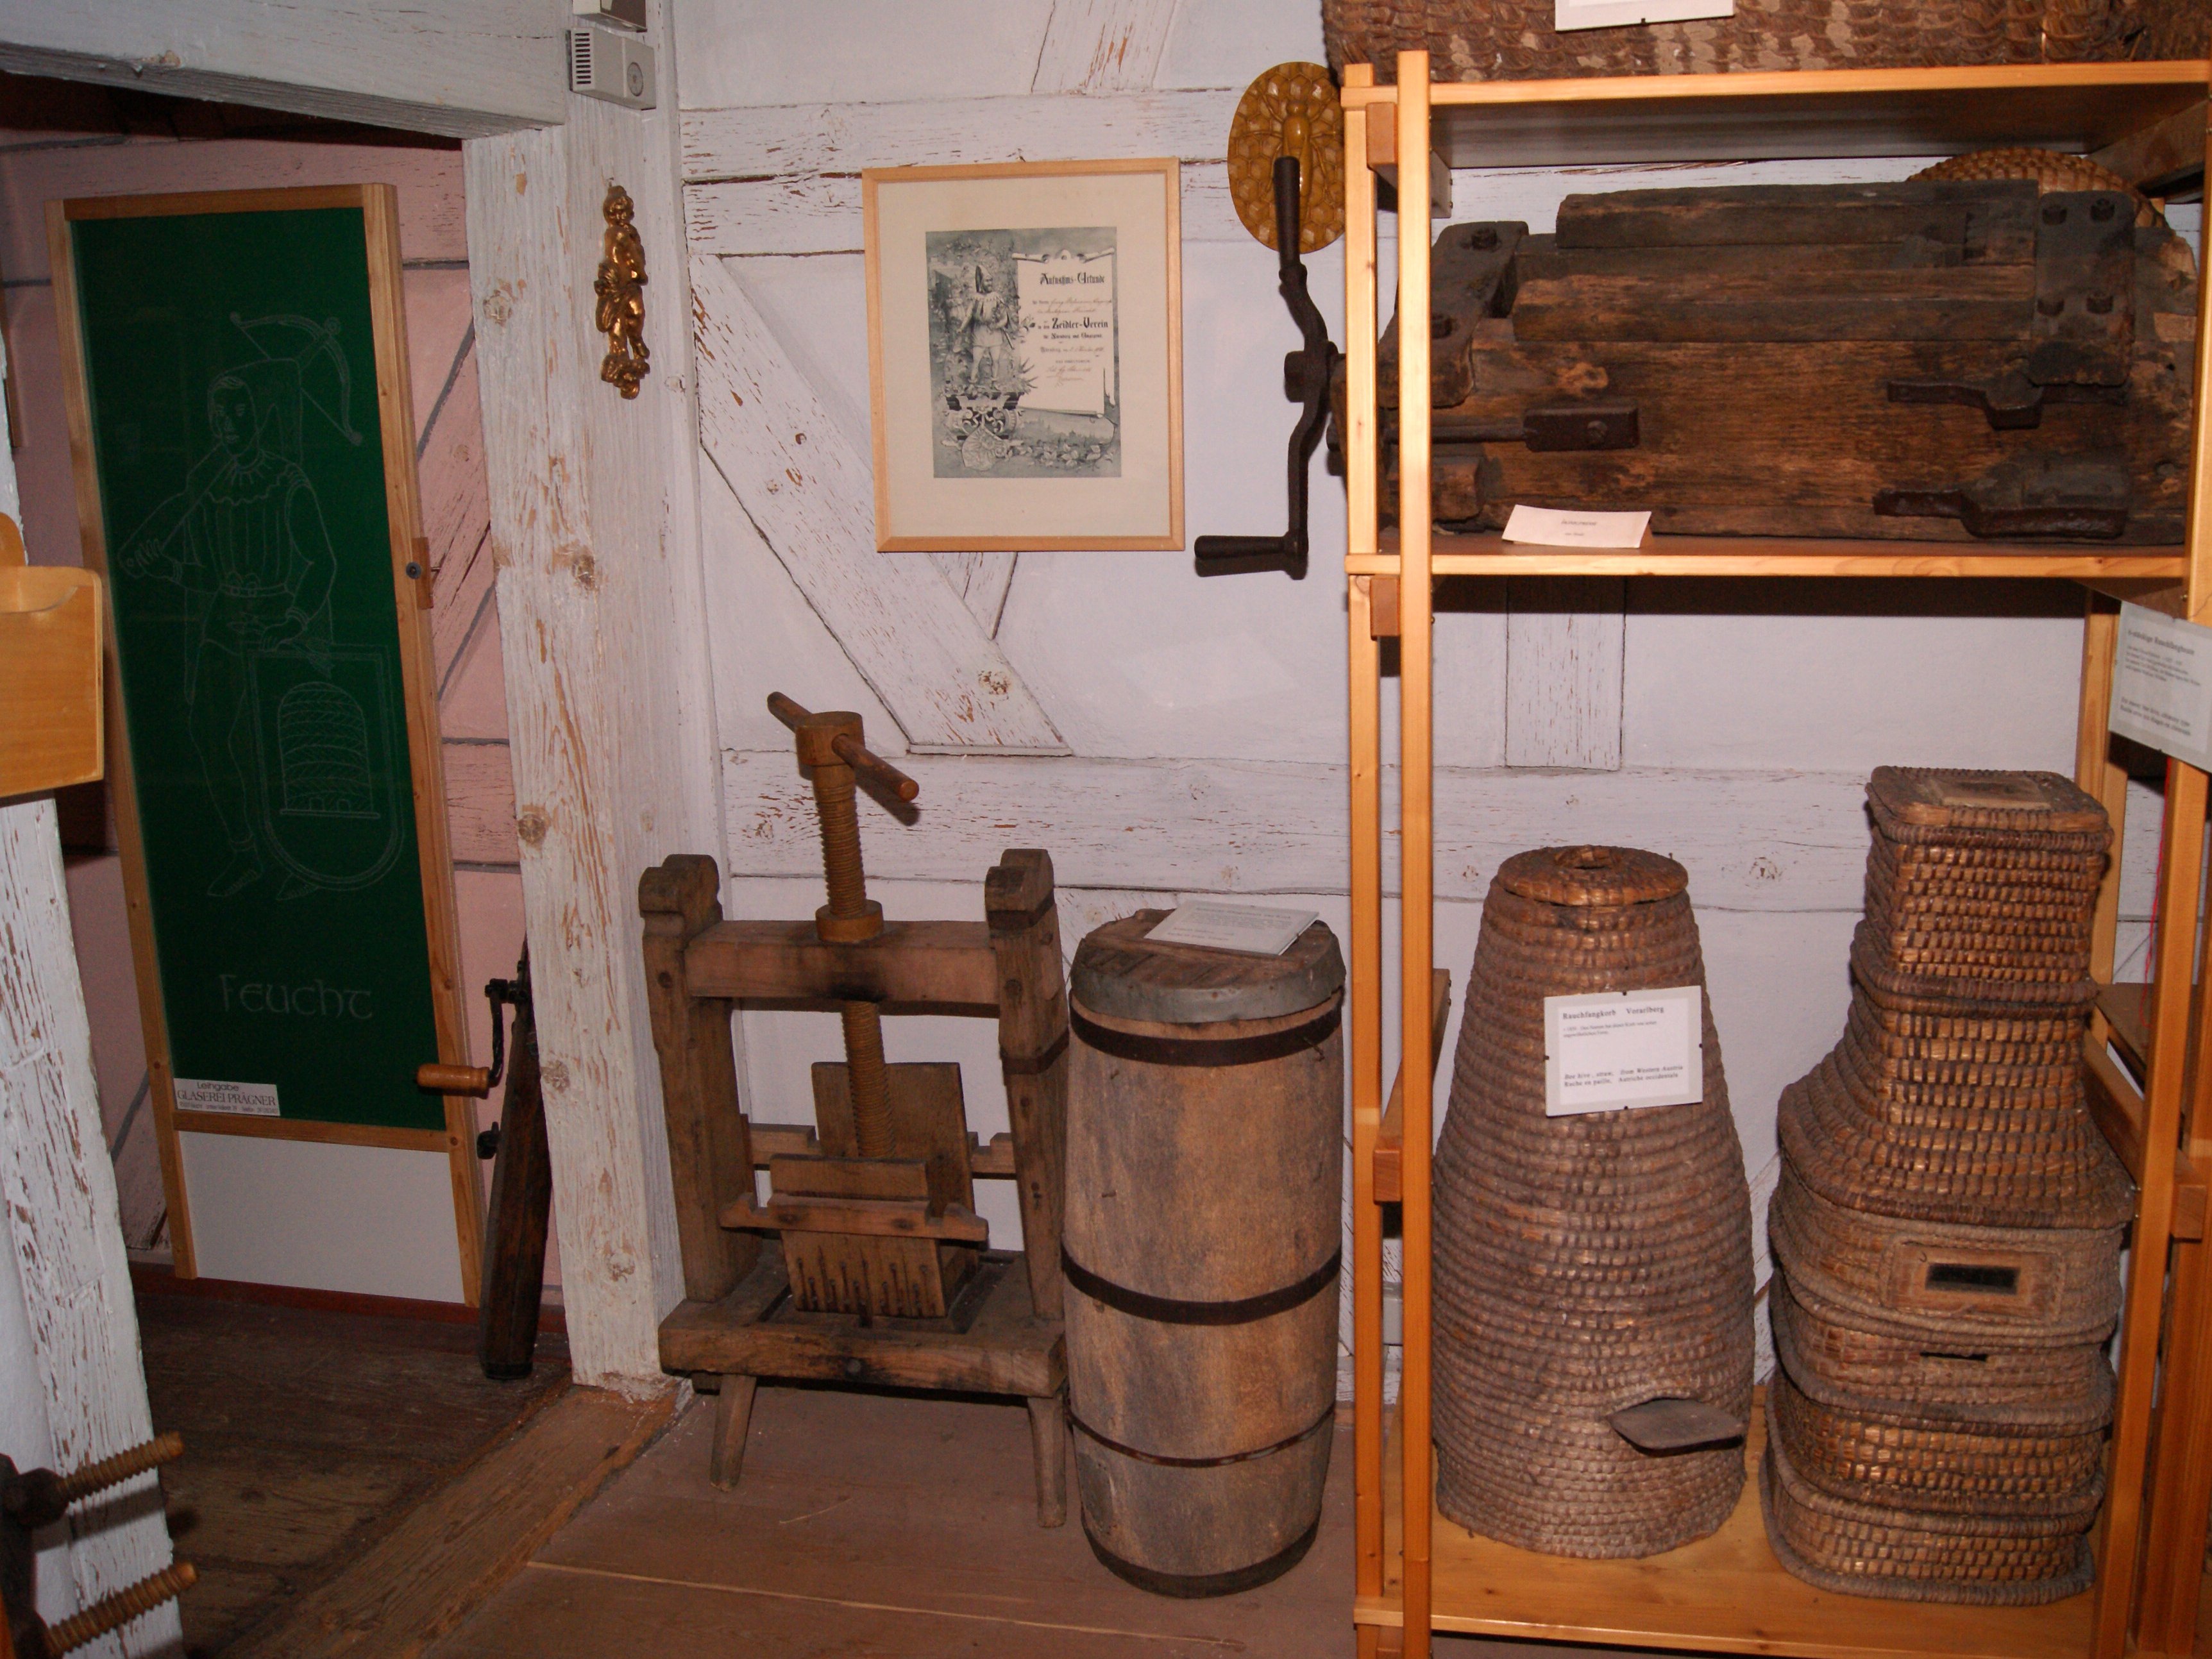 Section from the Apiculturists Museum with beehives and equipment